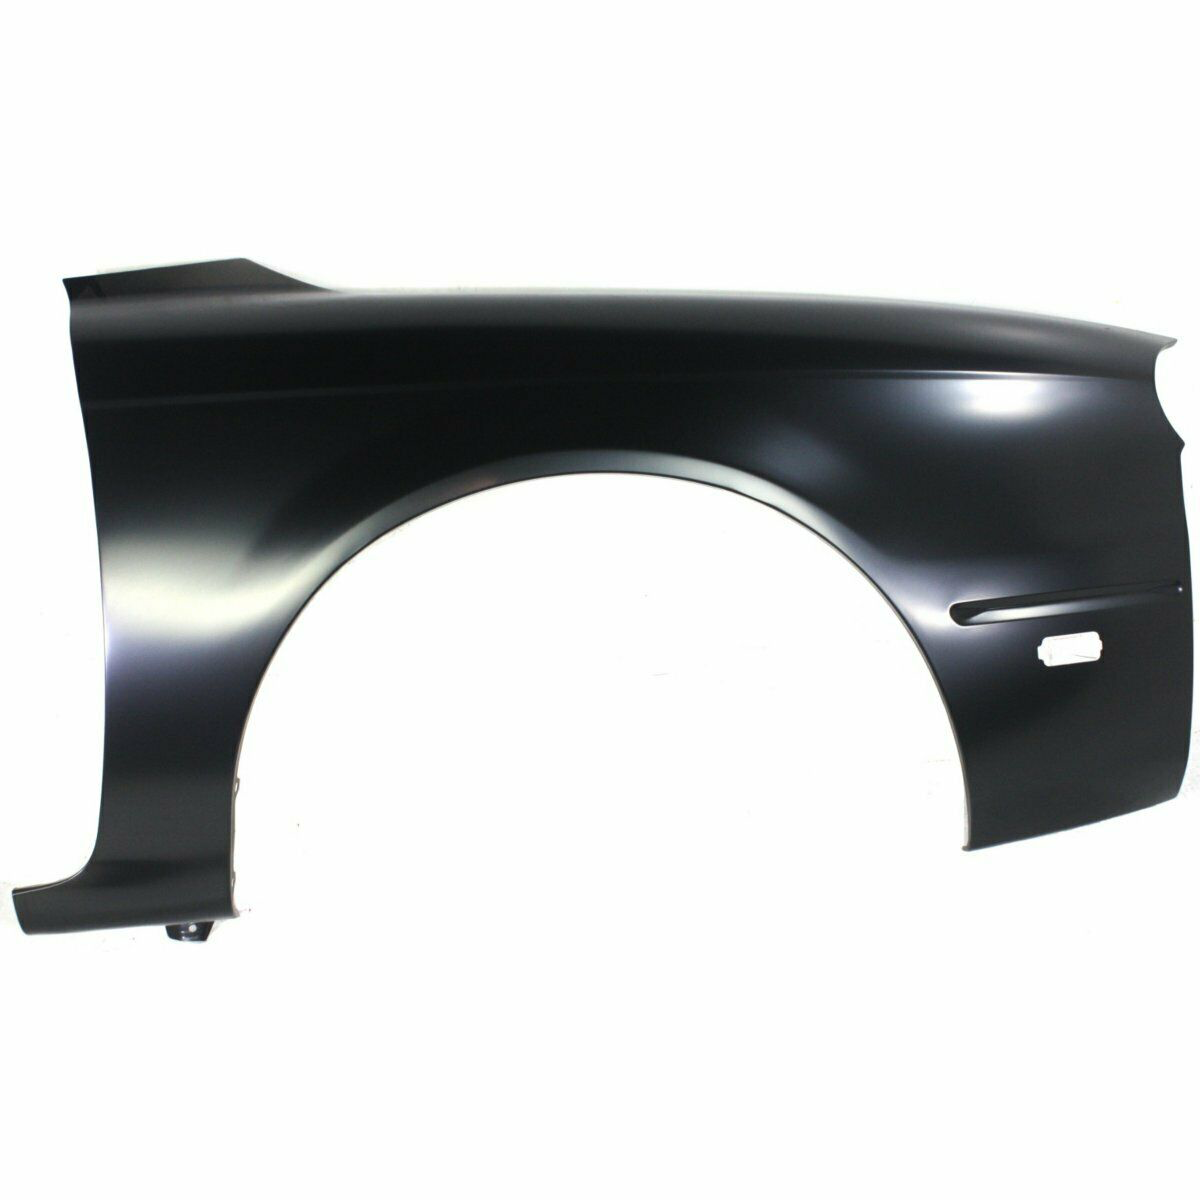 2002-2004 Kia Spectra Hatchback Right Fender Painted to Match